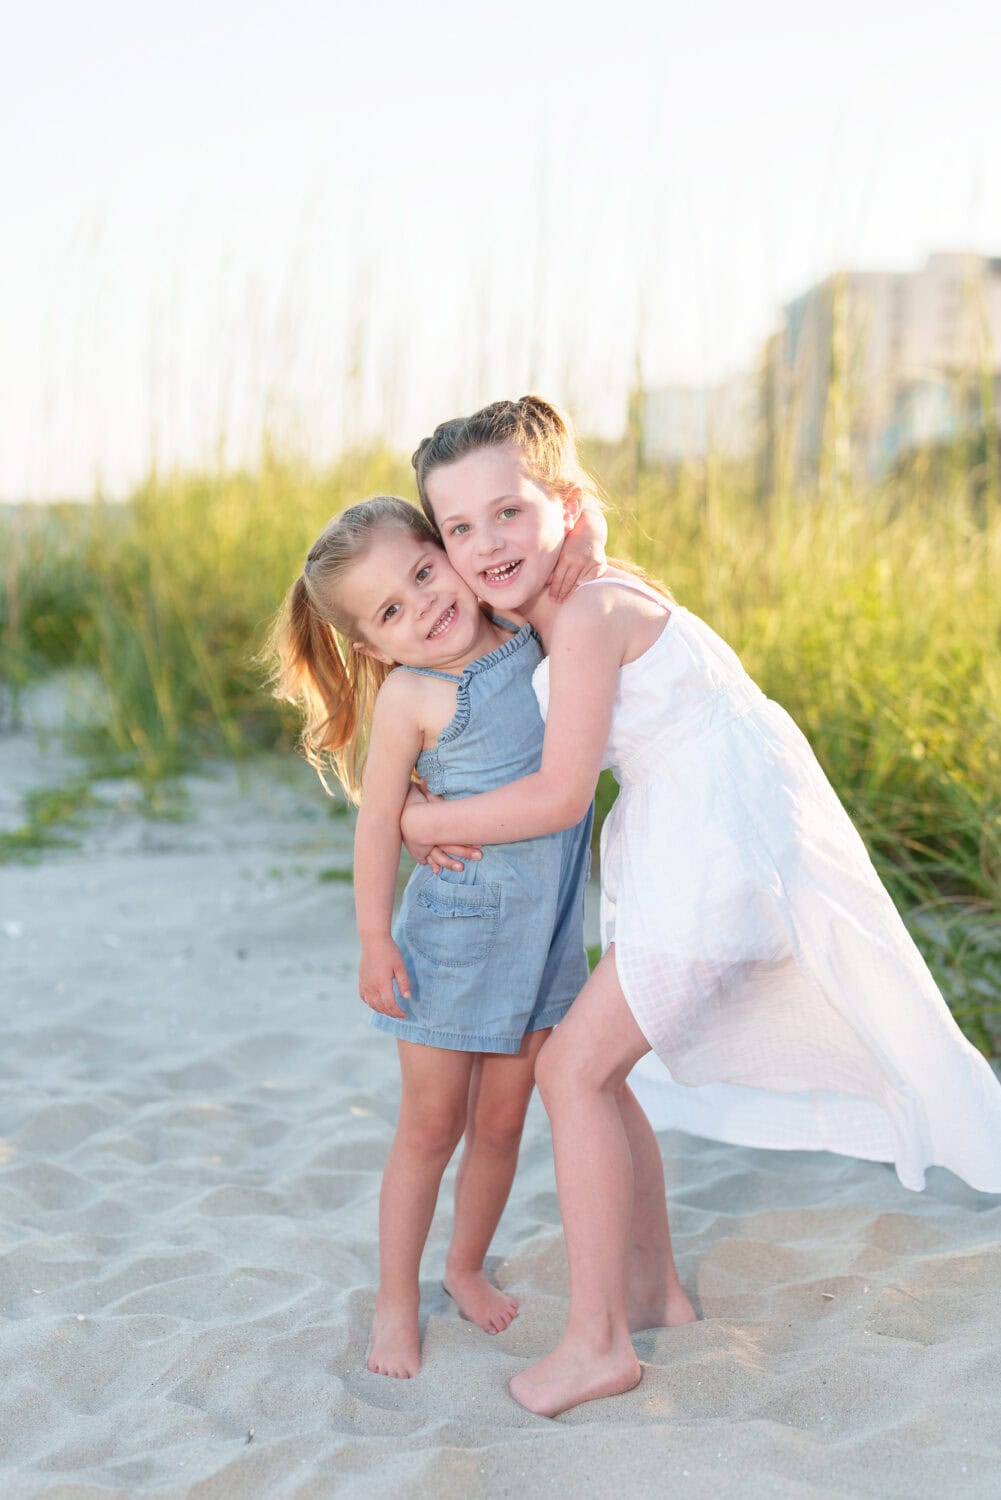 Big sister giving little sister a hug by the dunes - North Myrtle Beach